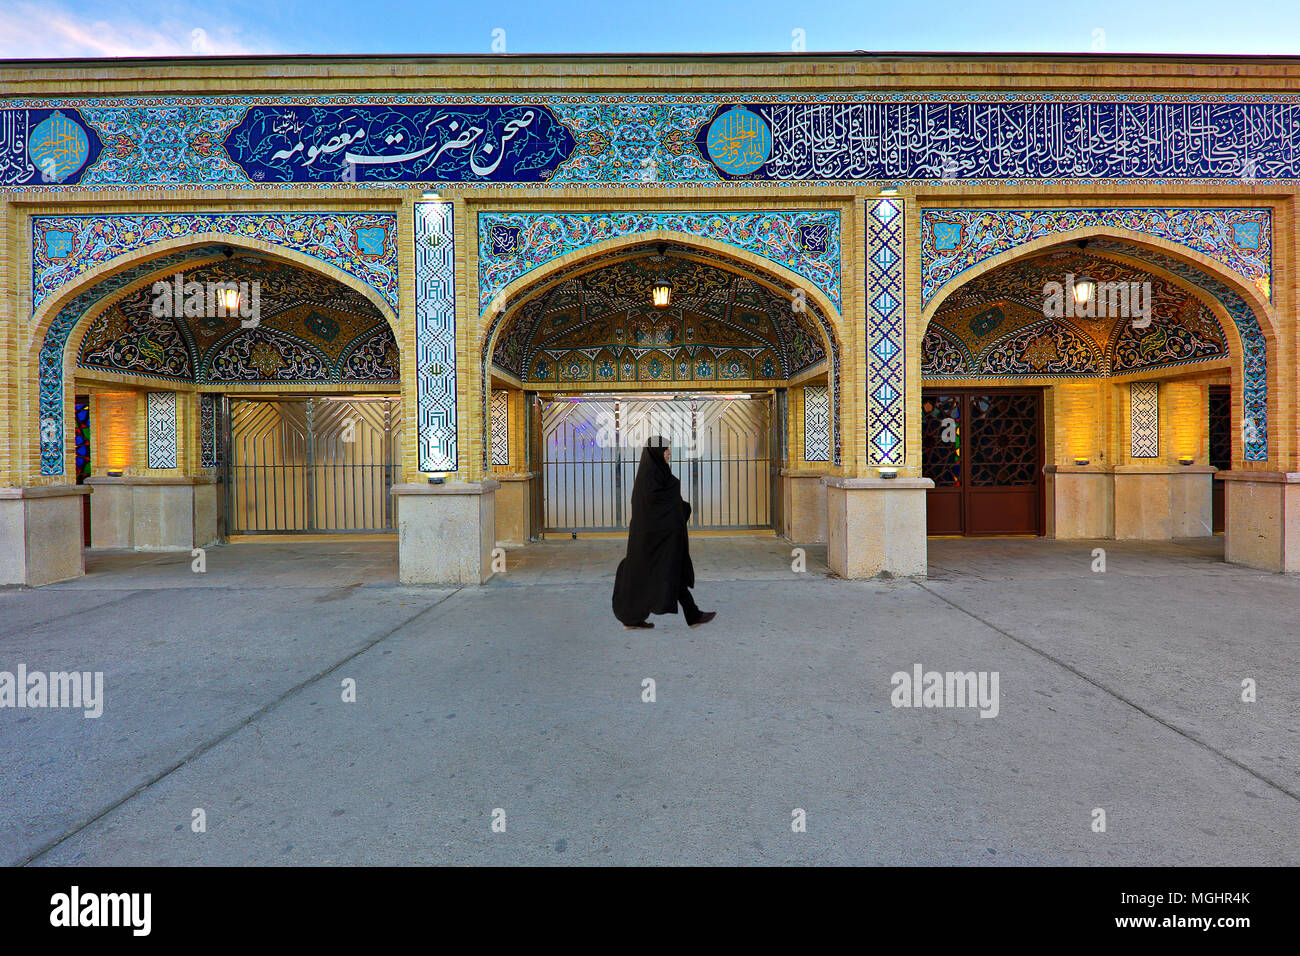 Iranian woman walking by the ancient arched wall of Holy Shrine of Shah Ceragh, in Shiraz, Iran. Stock Photo